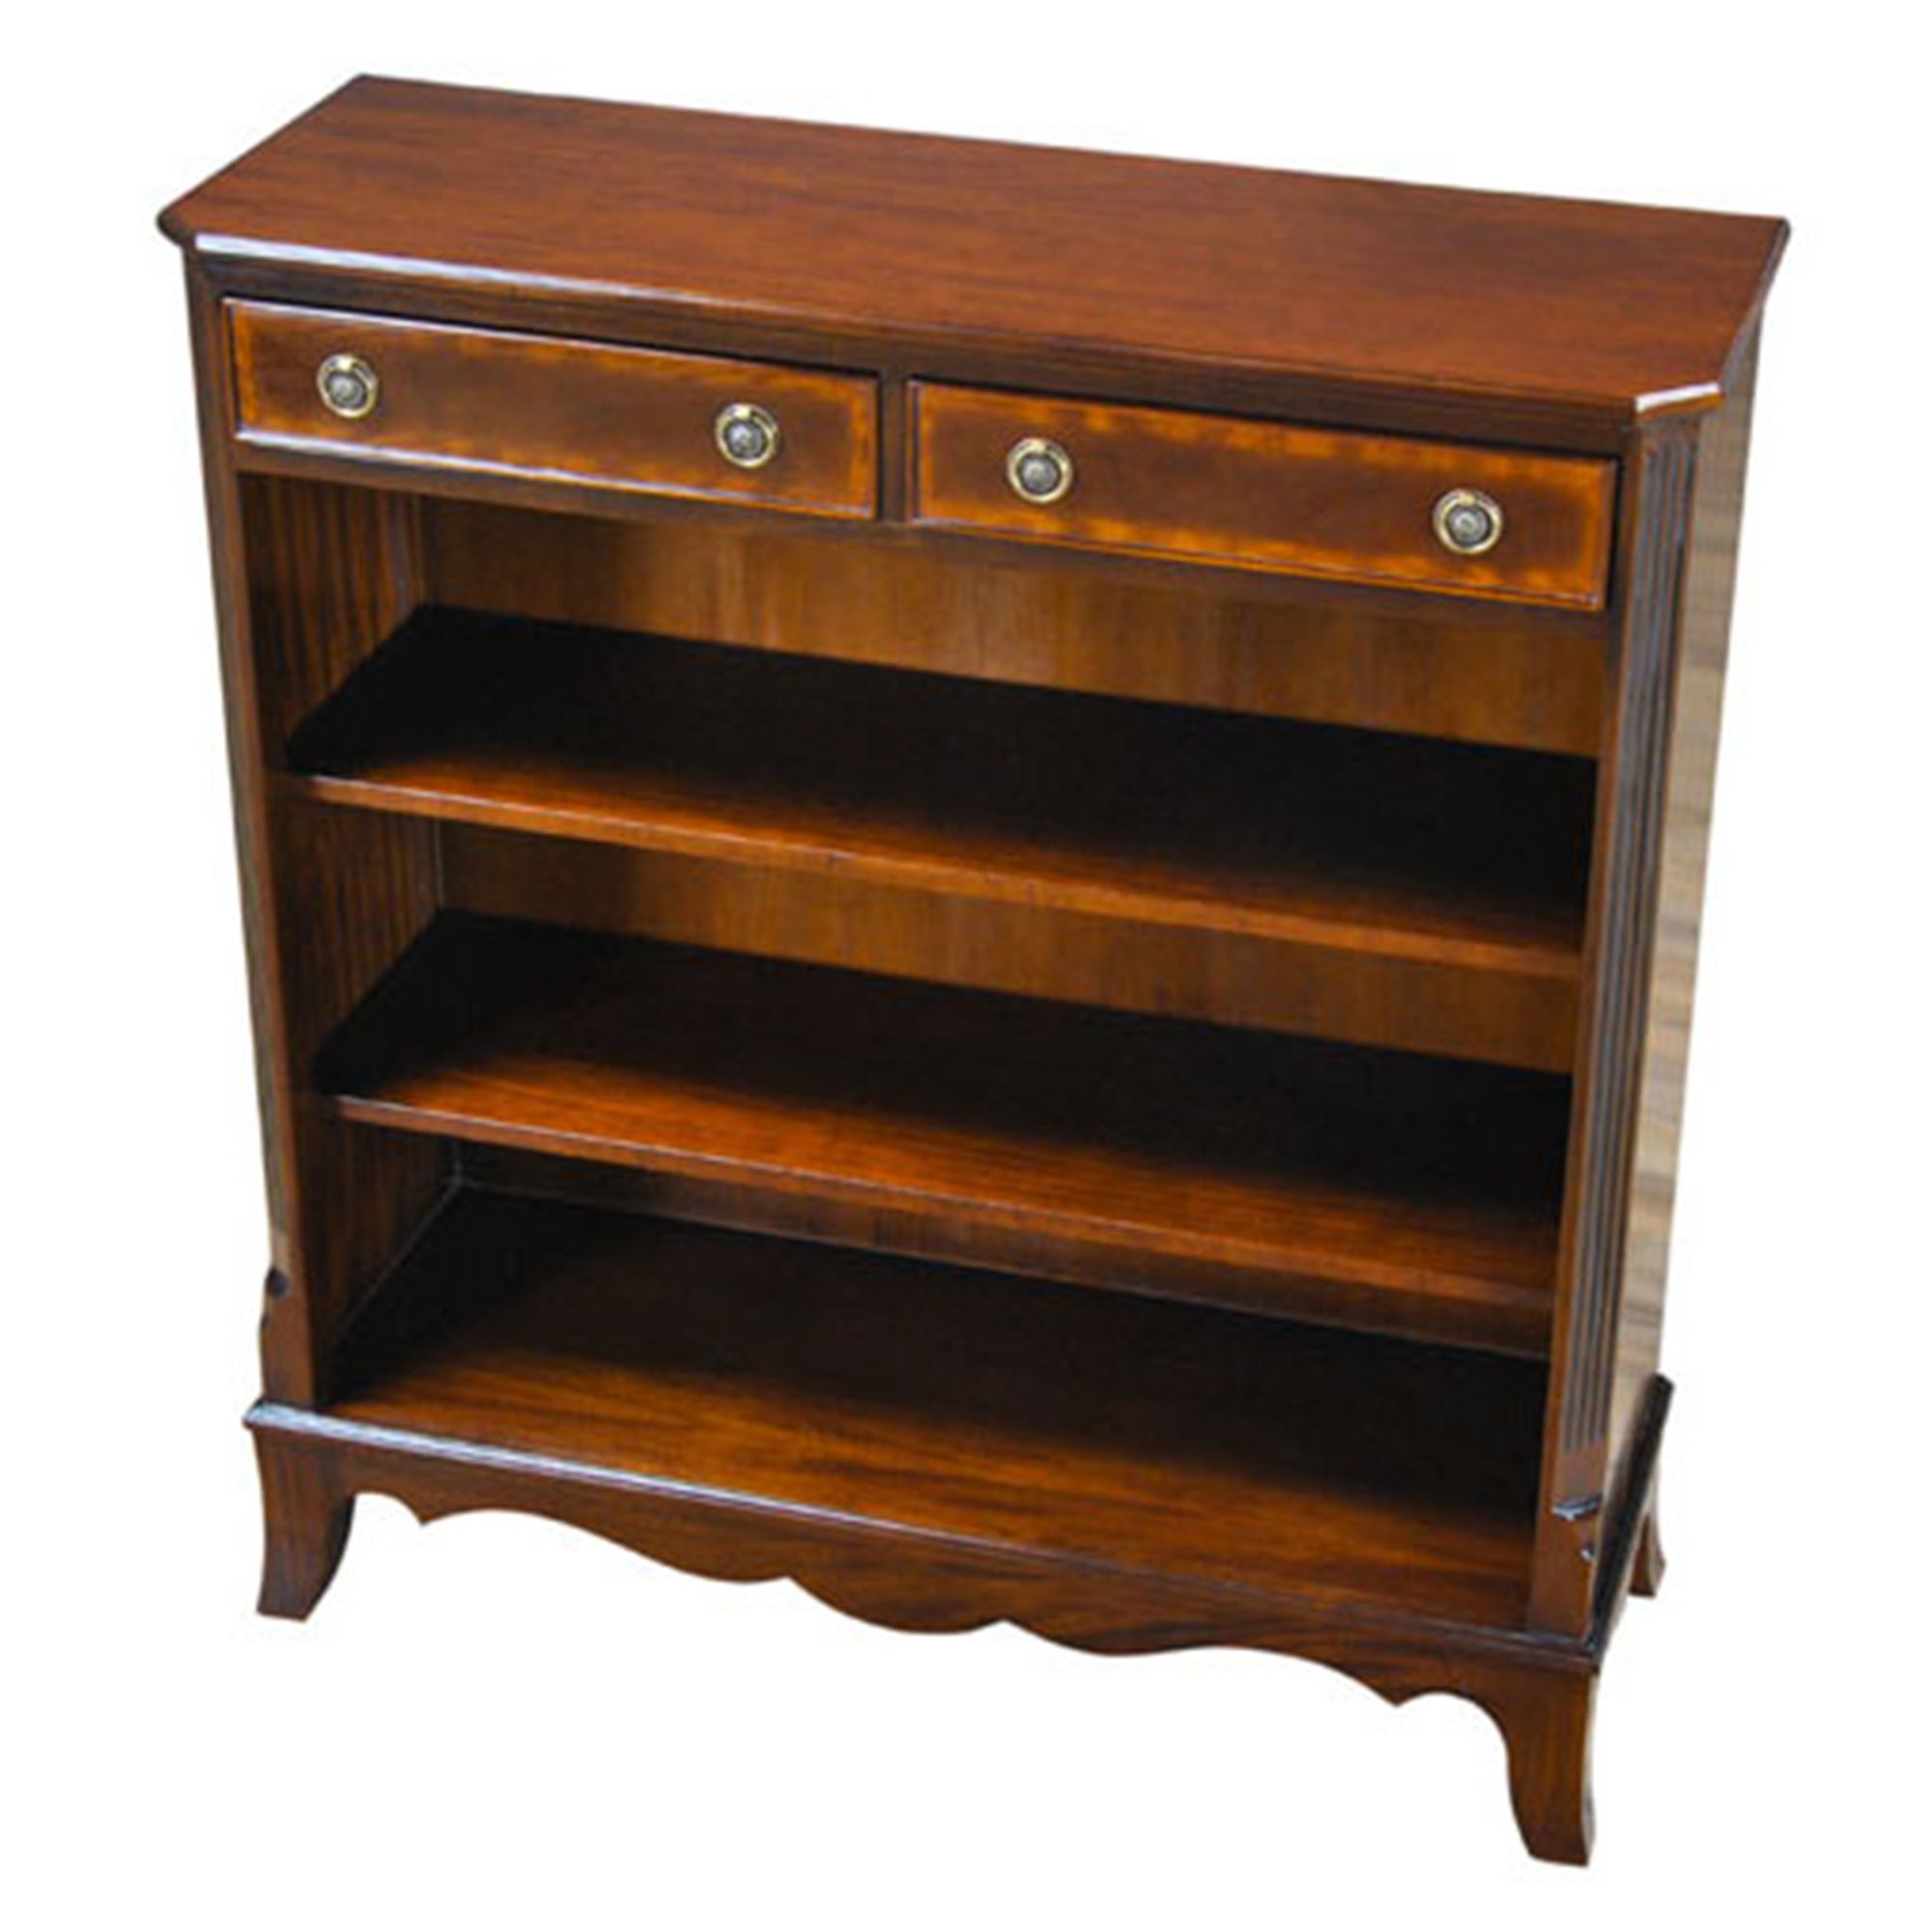 Two Drawer Bookcase, Banded Mahogany Bookcase, Niagara Furniture In Two Drawer Bookcases (View 9 of 15)